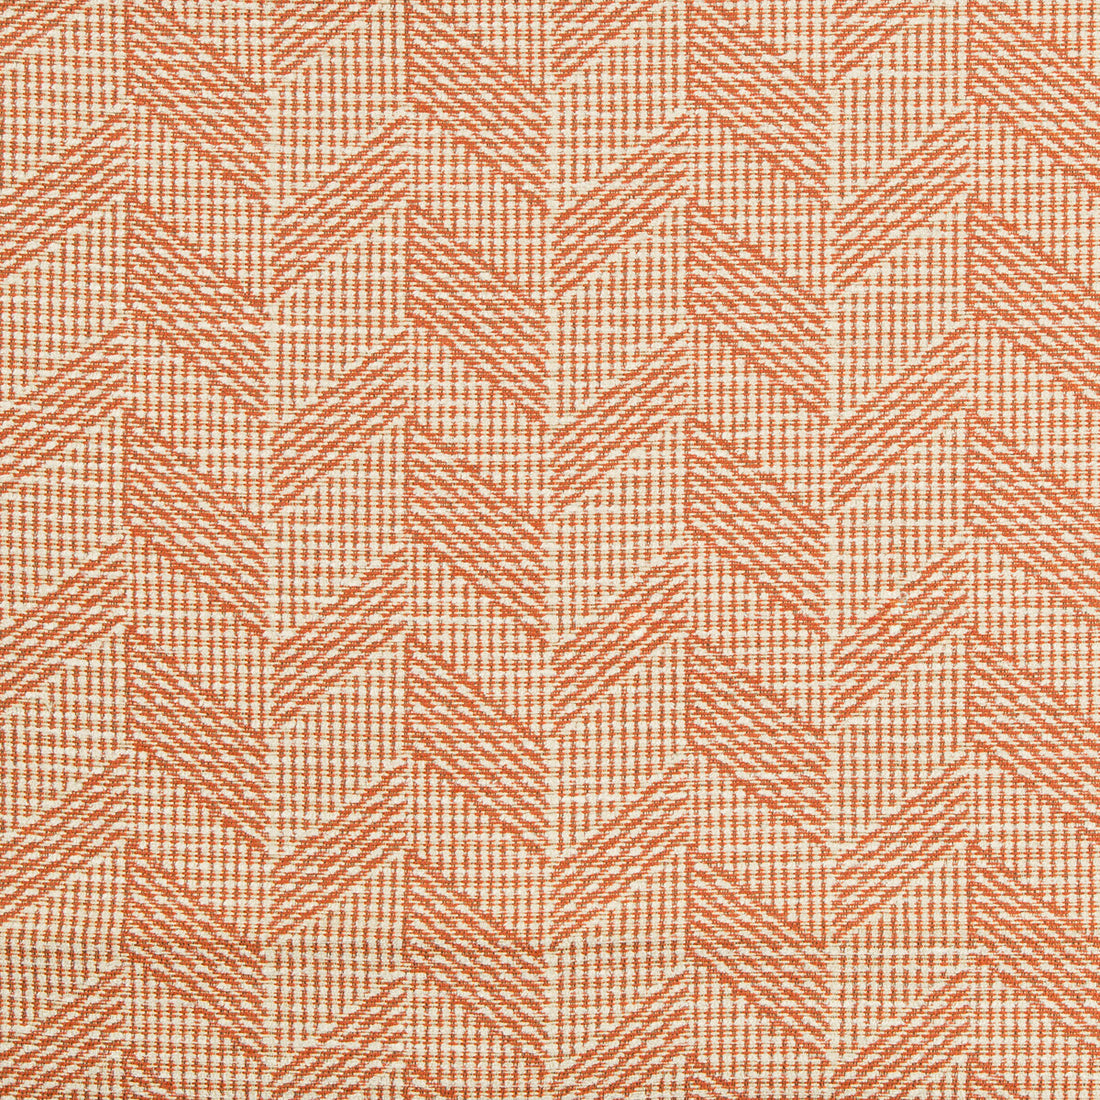 Cayuga fabric in persimmon color - pattern 35862.1612.0 - by Kravet Contract in the Gis Crypton collection